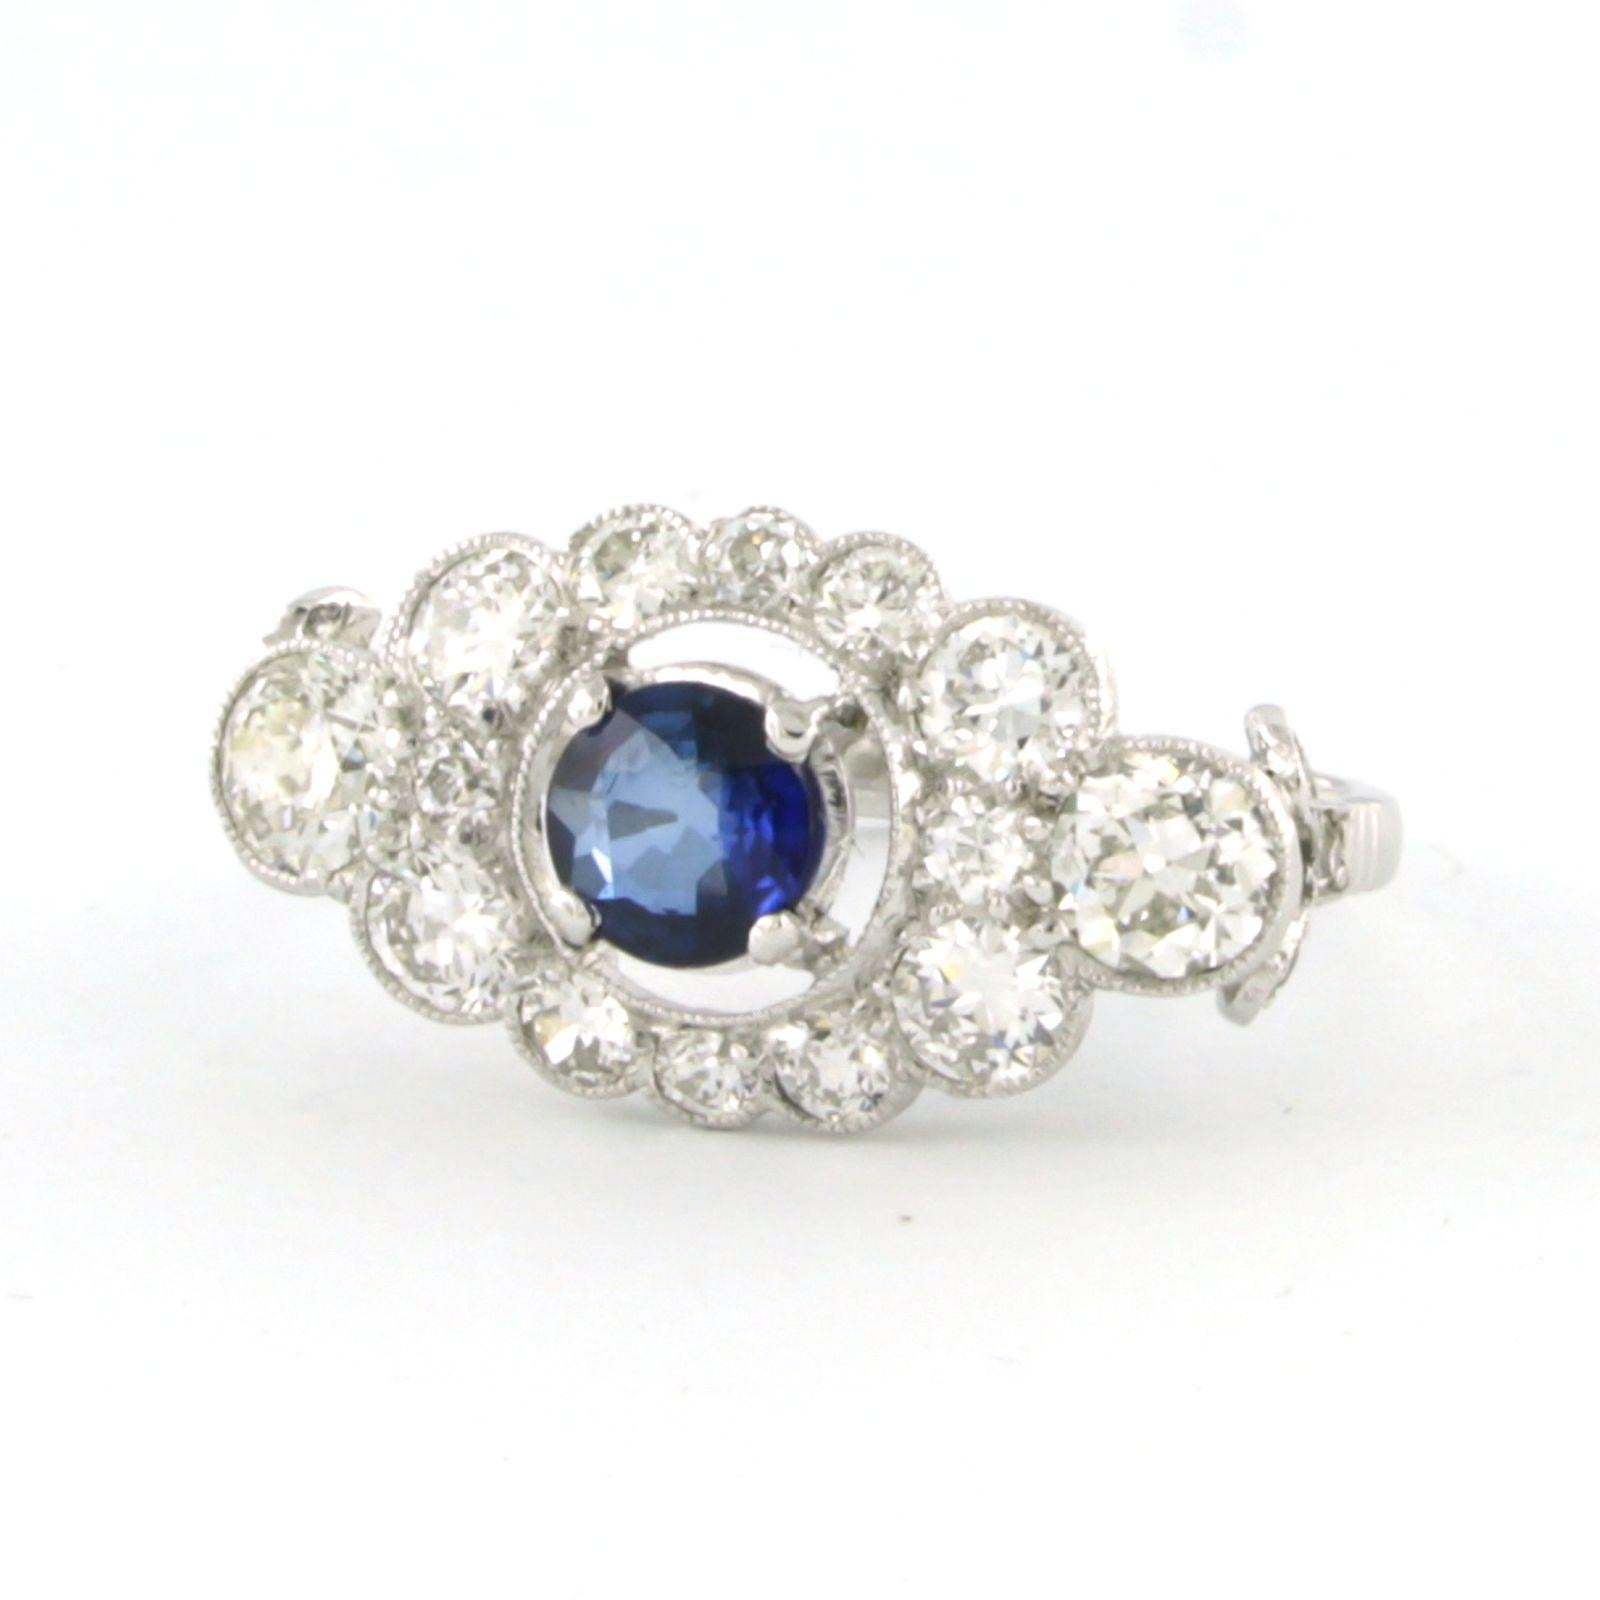 Old Mine Cut Ring set with sapphire and old mine cut diamonds up to 2.00ct platinum ring For Sale